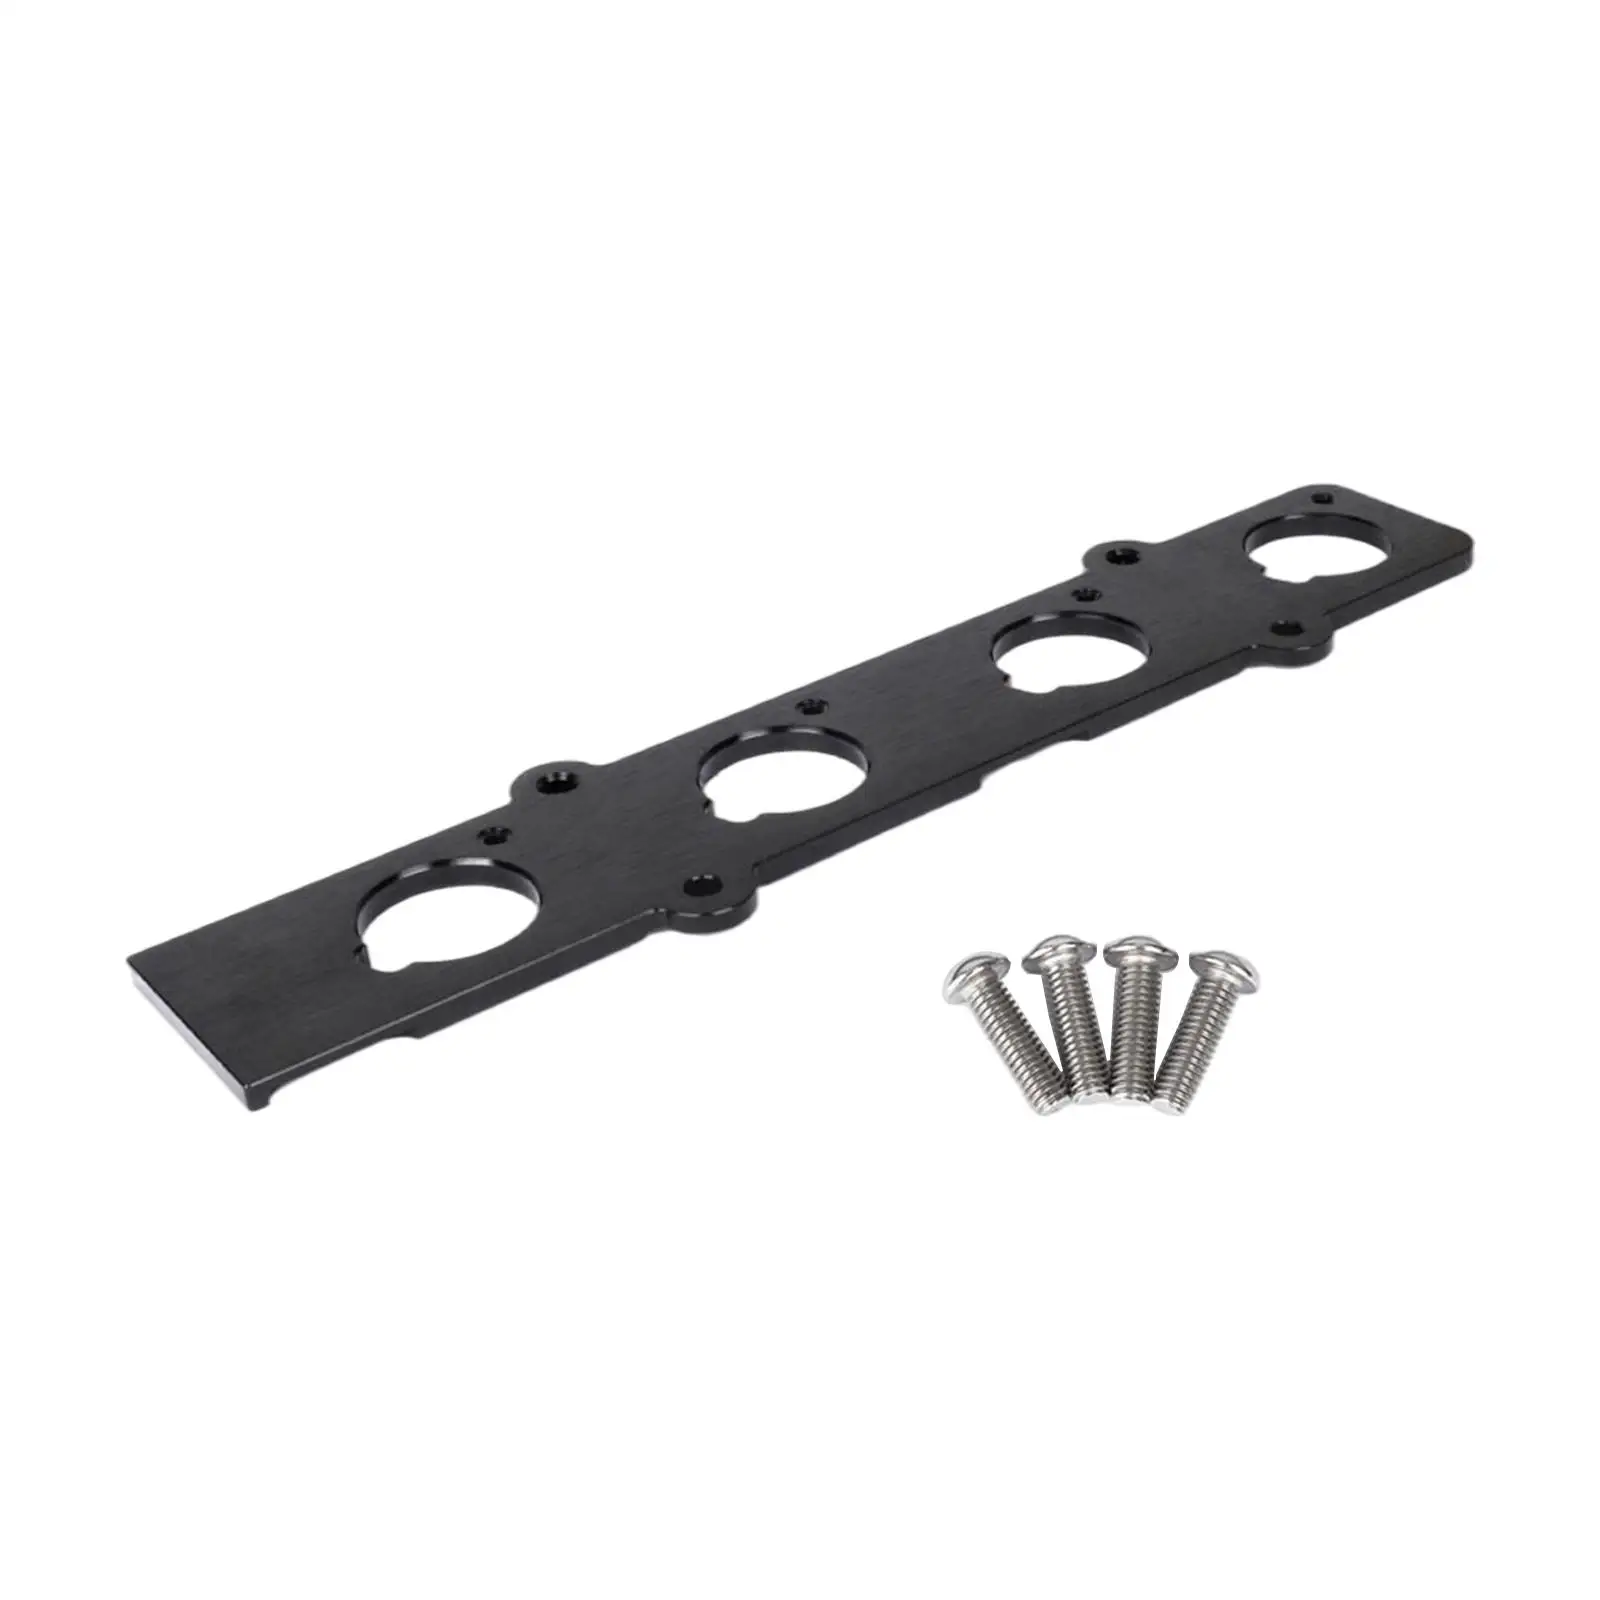 B-Series Dohc Vtec Coil Adapter Plate Conversion Adapters Fits for Acura B16 B18